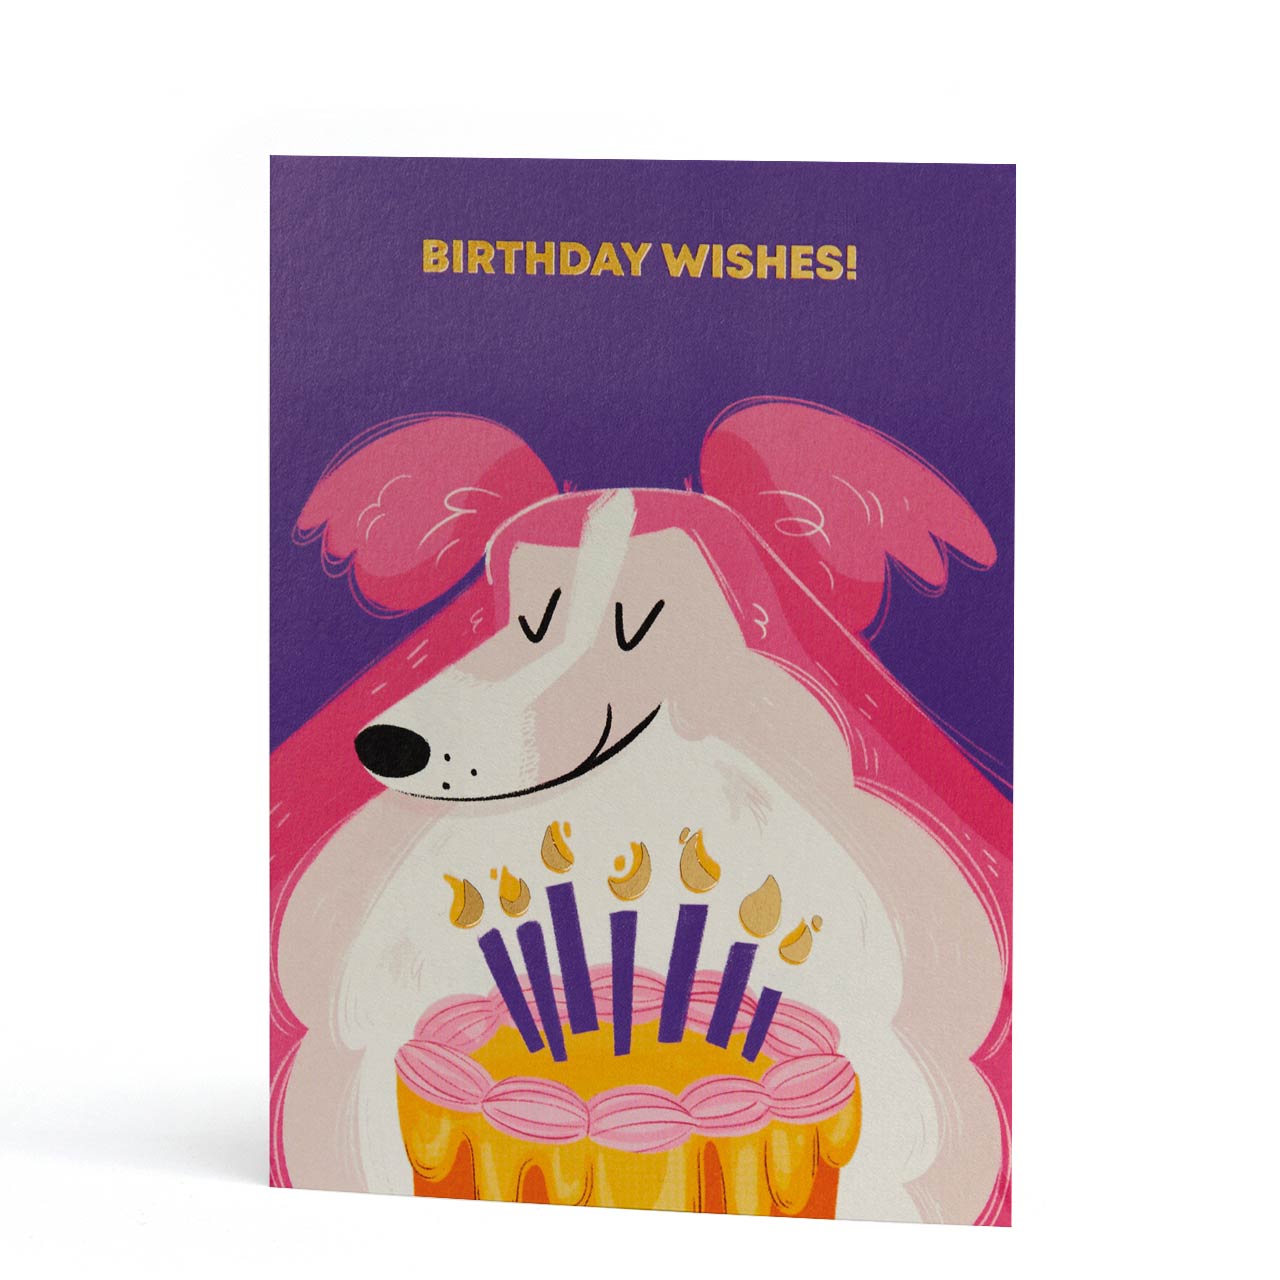 Collie and Cake Birthday Wishes Gold Foil Card